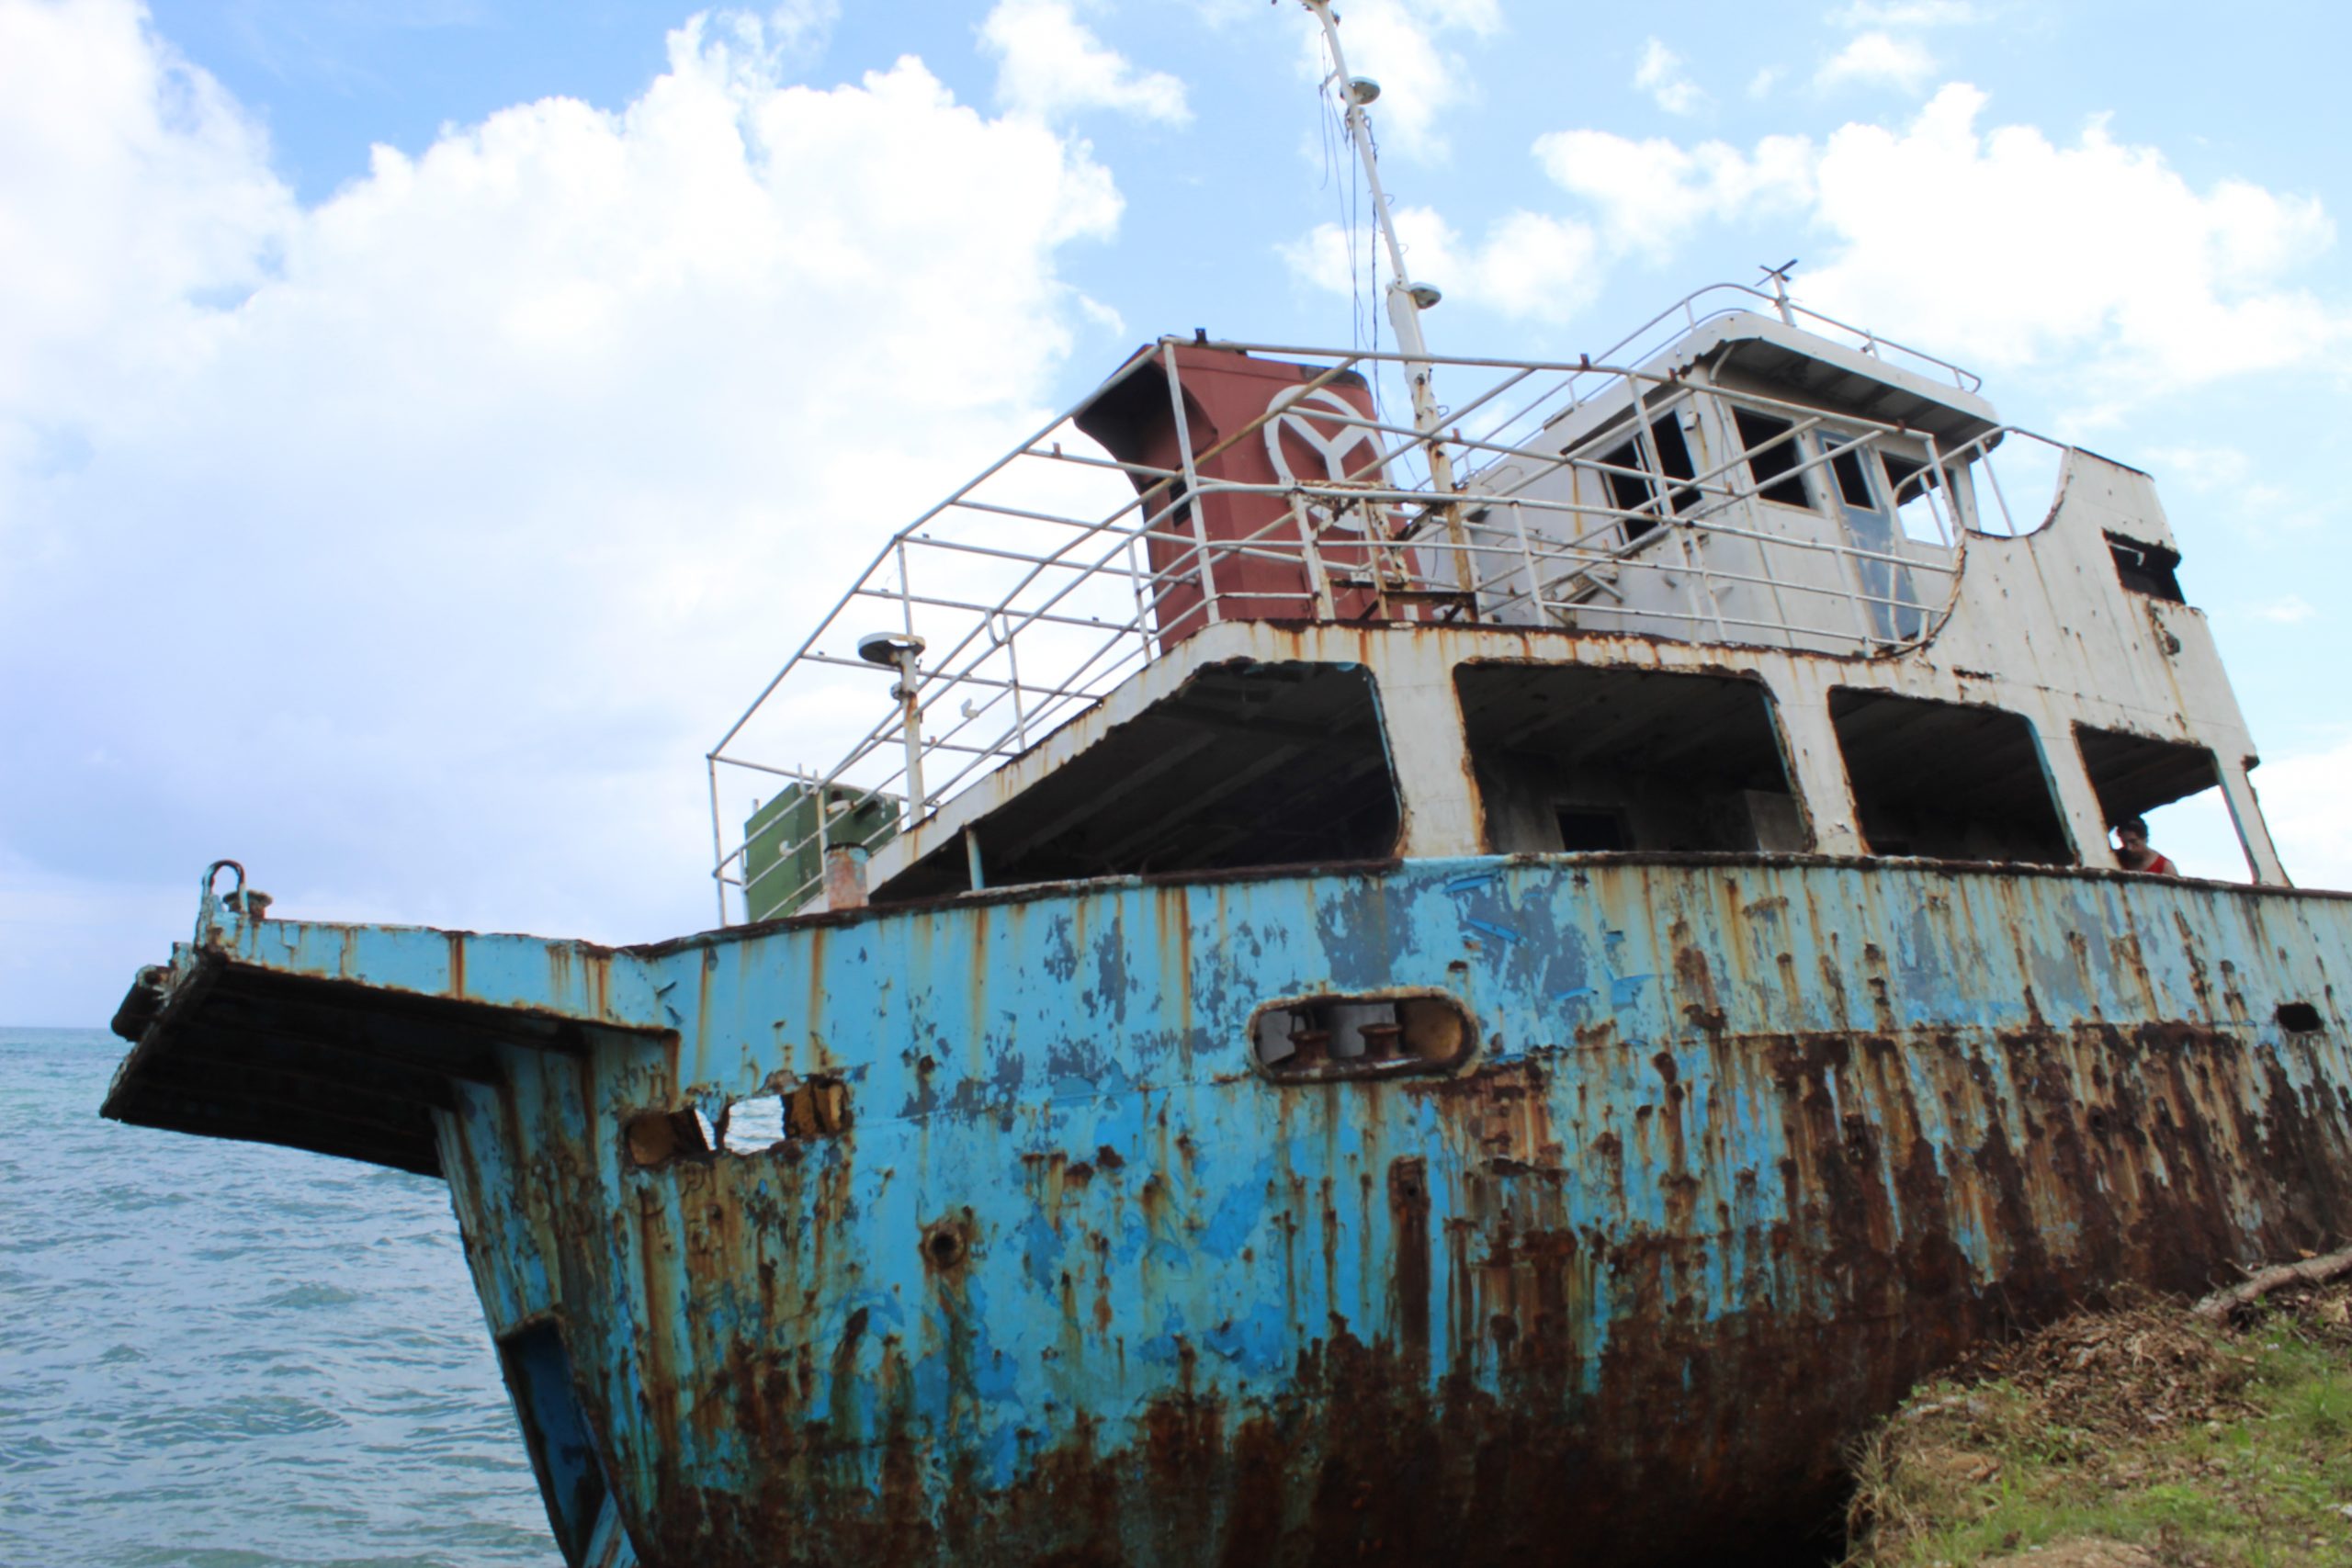 The main thing to do in Honiara is to go snorkelling for shipwrecks